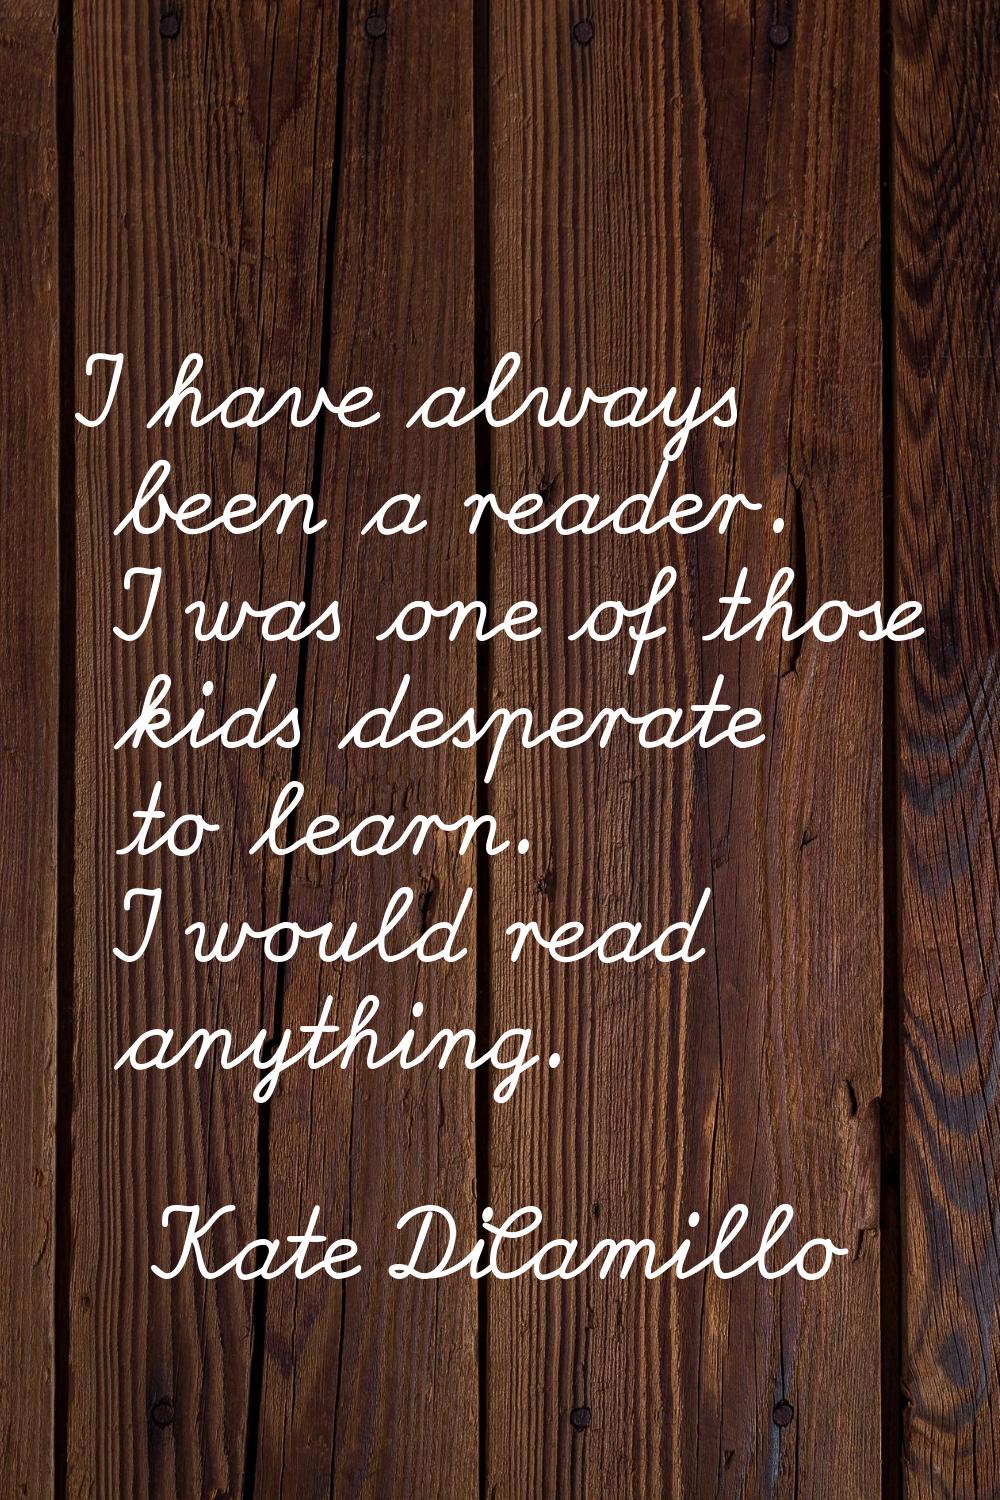 I have always been a reader. I was one of those kids desperate to learn. I would read anything.